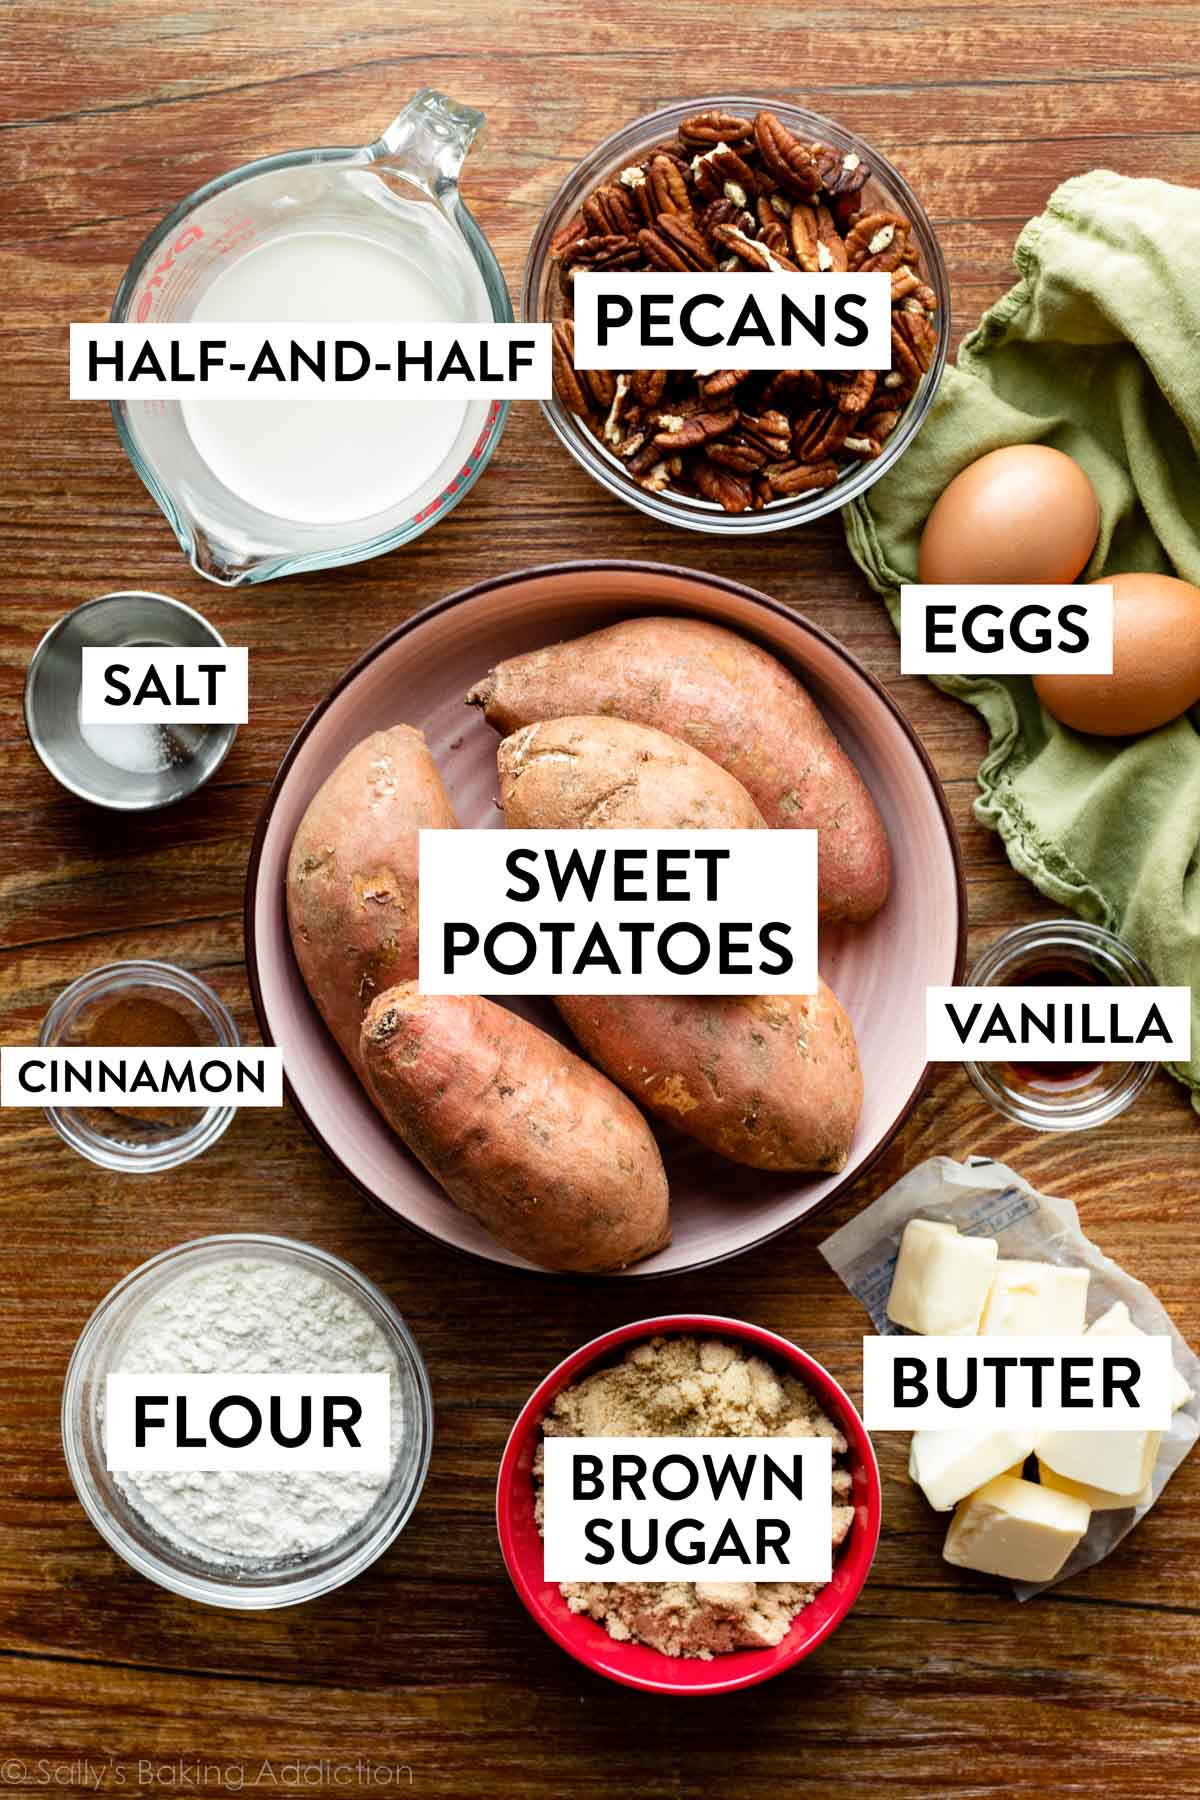 ingredients on a wooden background including pecans, sweet potatoes, eggs, butter, brown sugar and more.